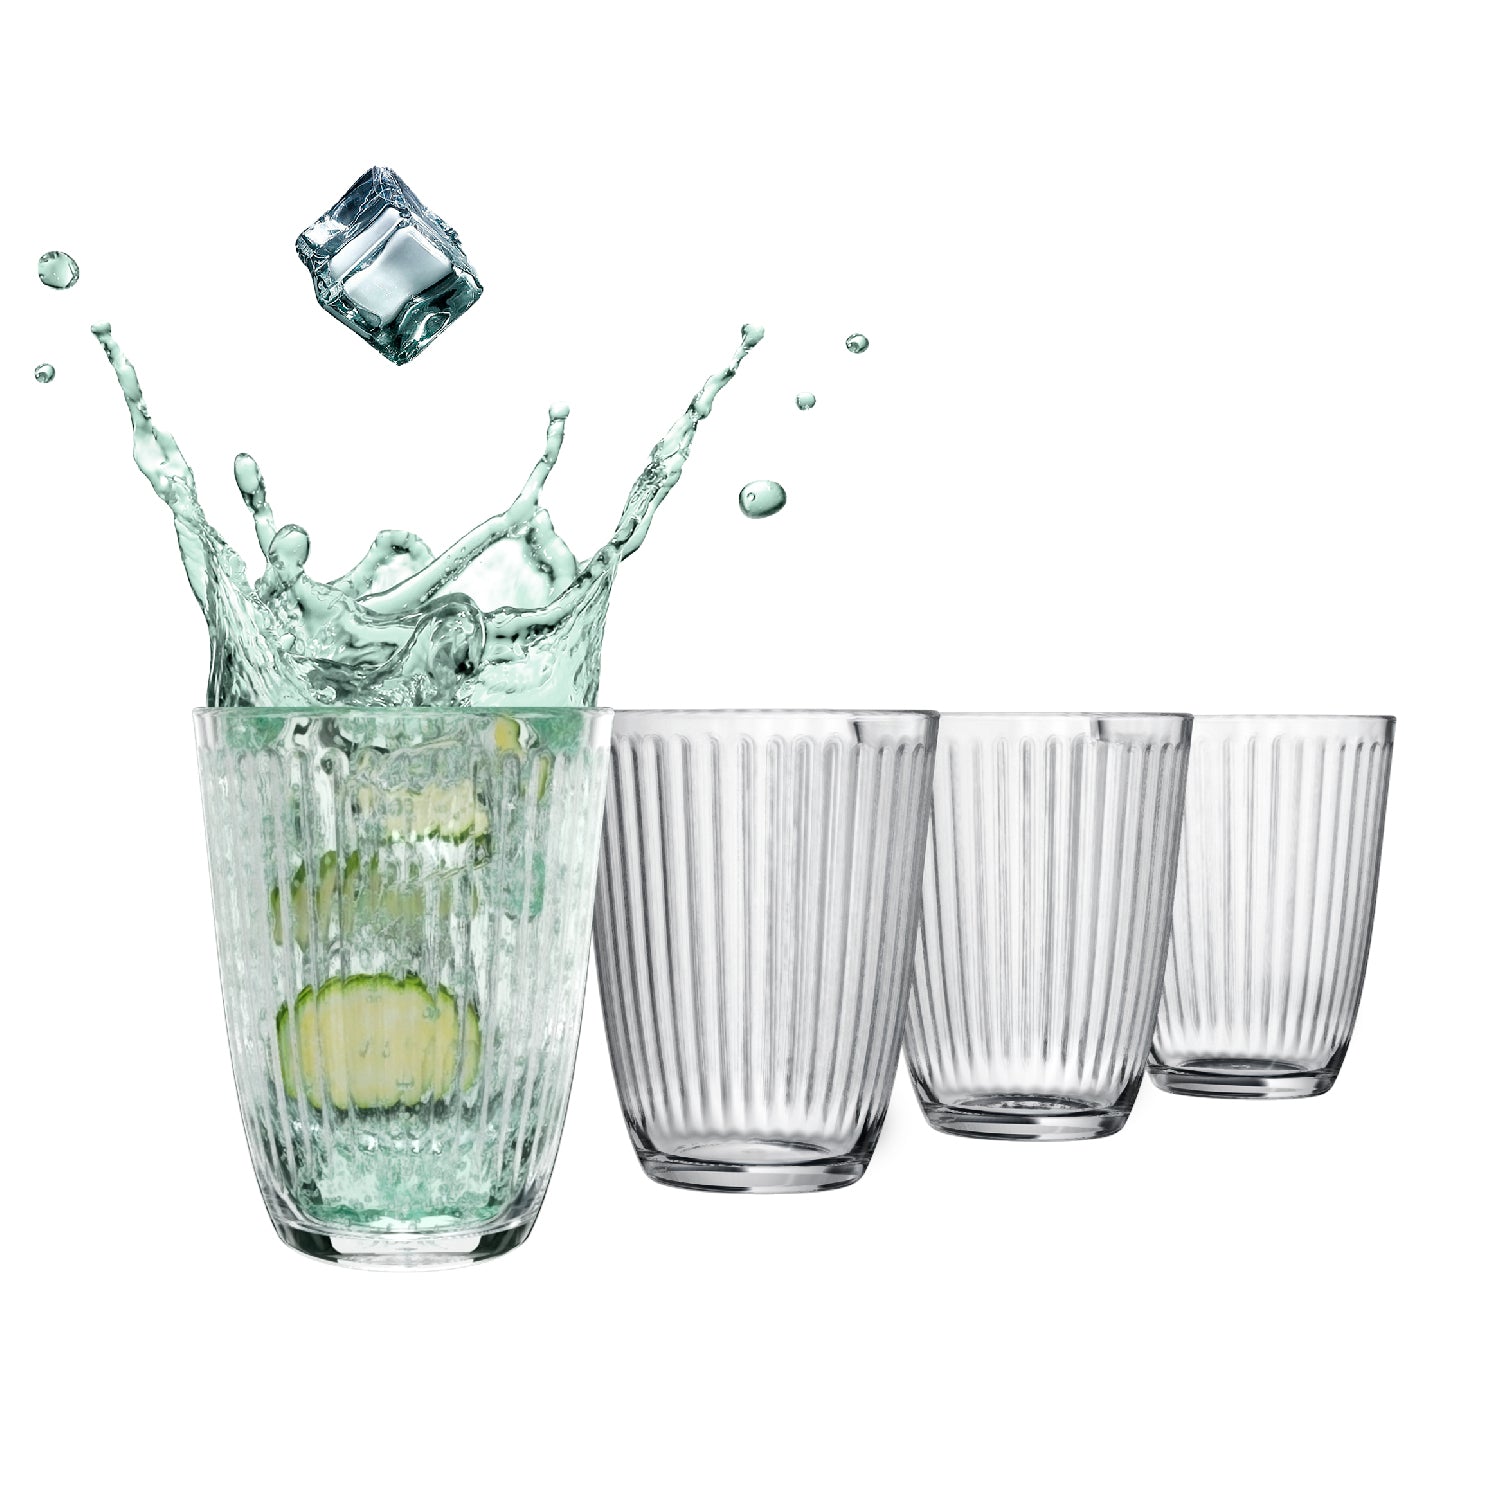  Vintage Art Deco Crystal Highball Ribbed Glass Set of 4 -  Ripple, Collins Glassware 14oz Classic Crystal Cocktail Glasses Perfect for  Water, Champagne, Beer, Juice, Tom Cocktails - Barware Tumblers: Home